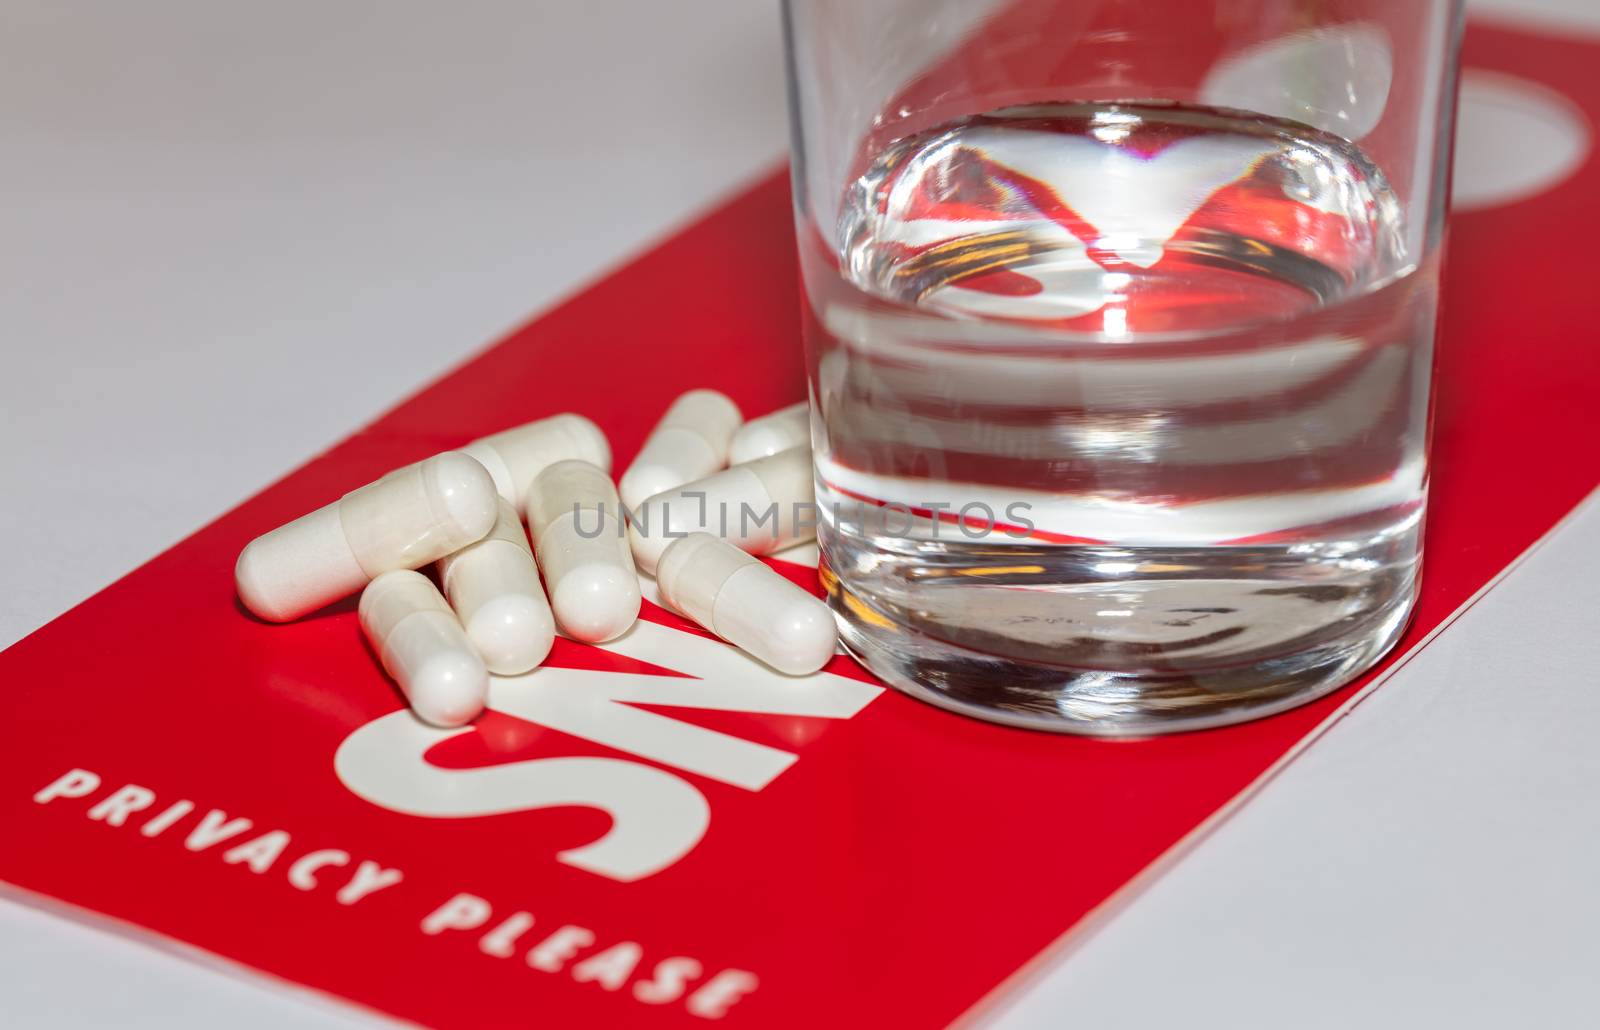 White pills and a glass of water on red privacy, snoozing sign. Snoozing sign reads Privacy please. Sign and some pills are in soft focus.